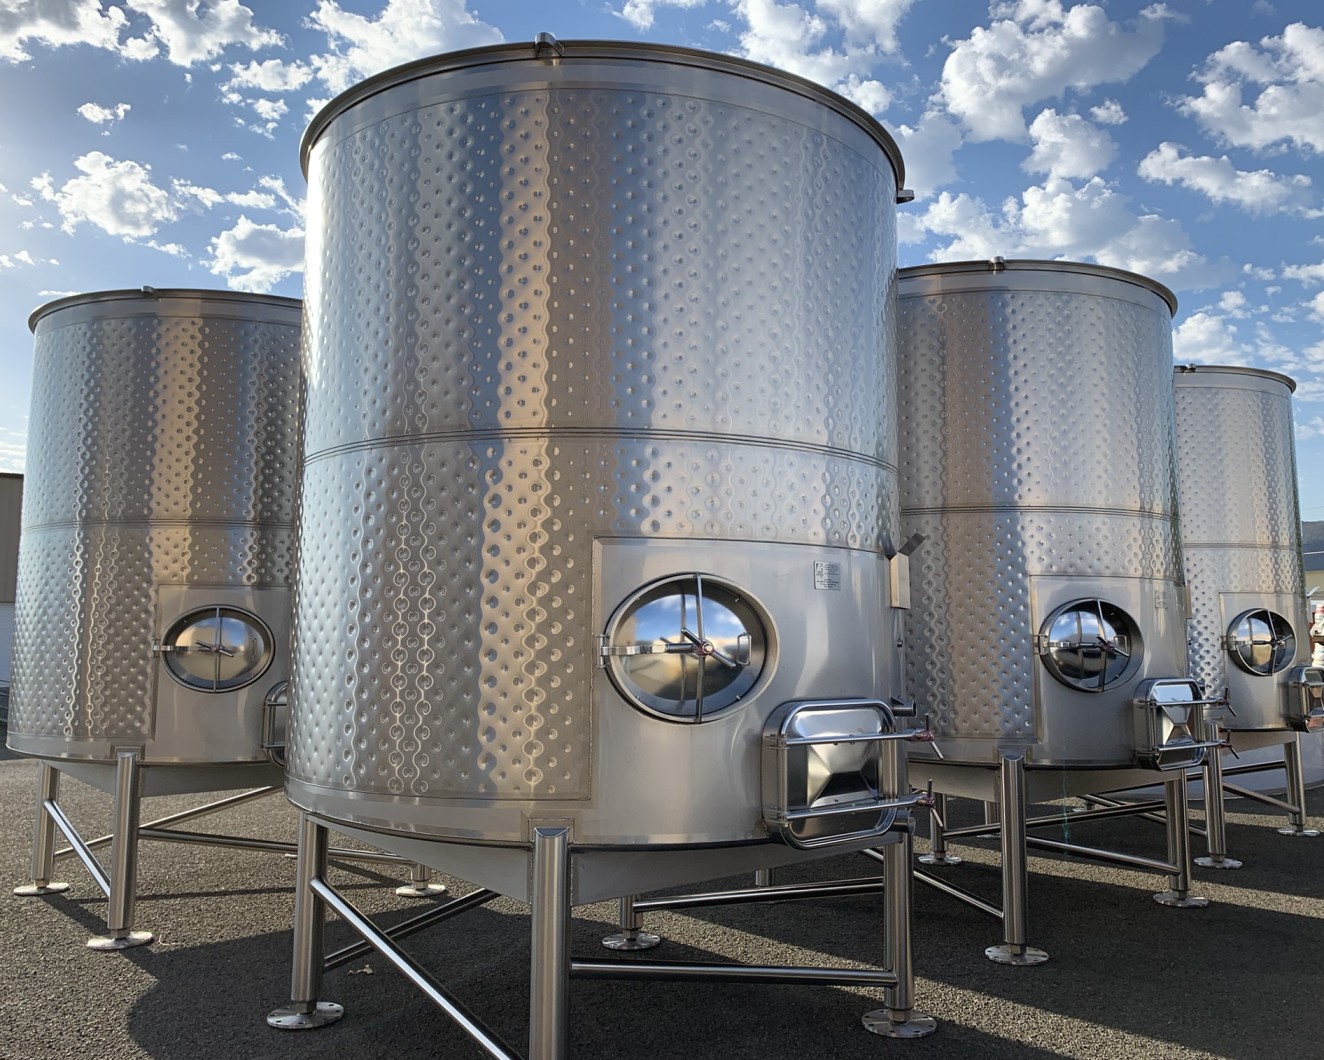 Four large medium sized winery fermentation tanks outside with blue sky and white fluffy clouds.